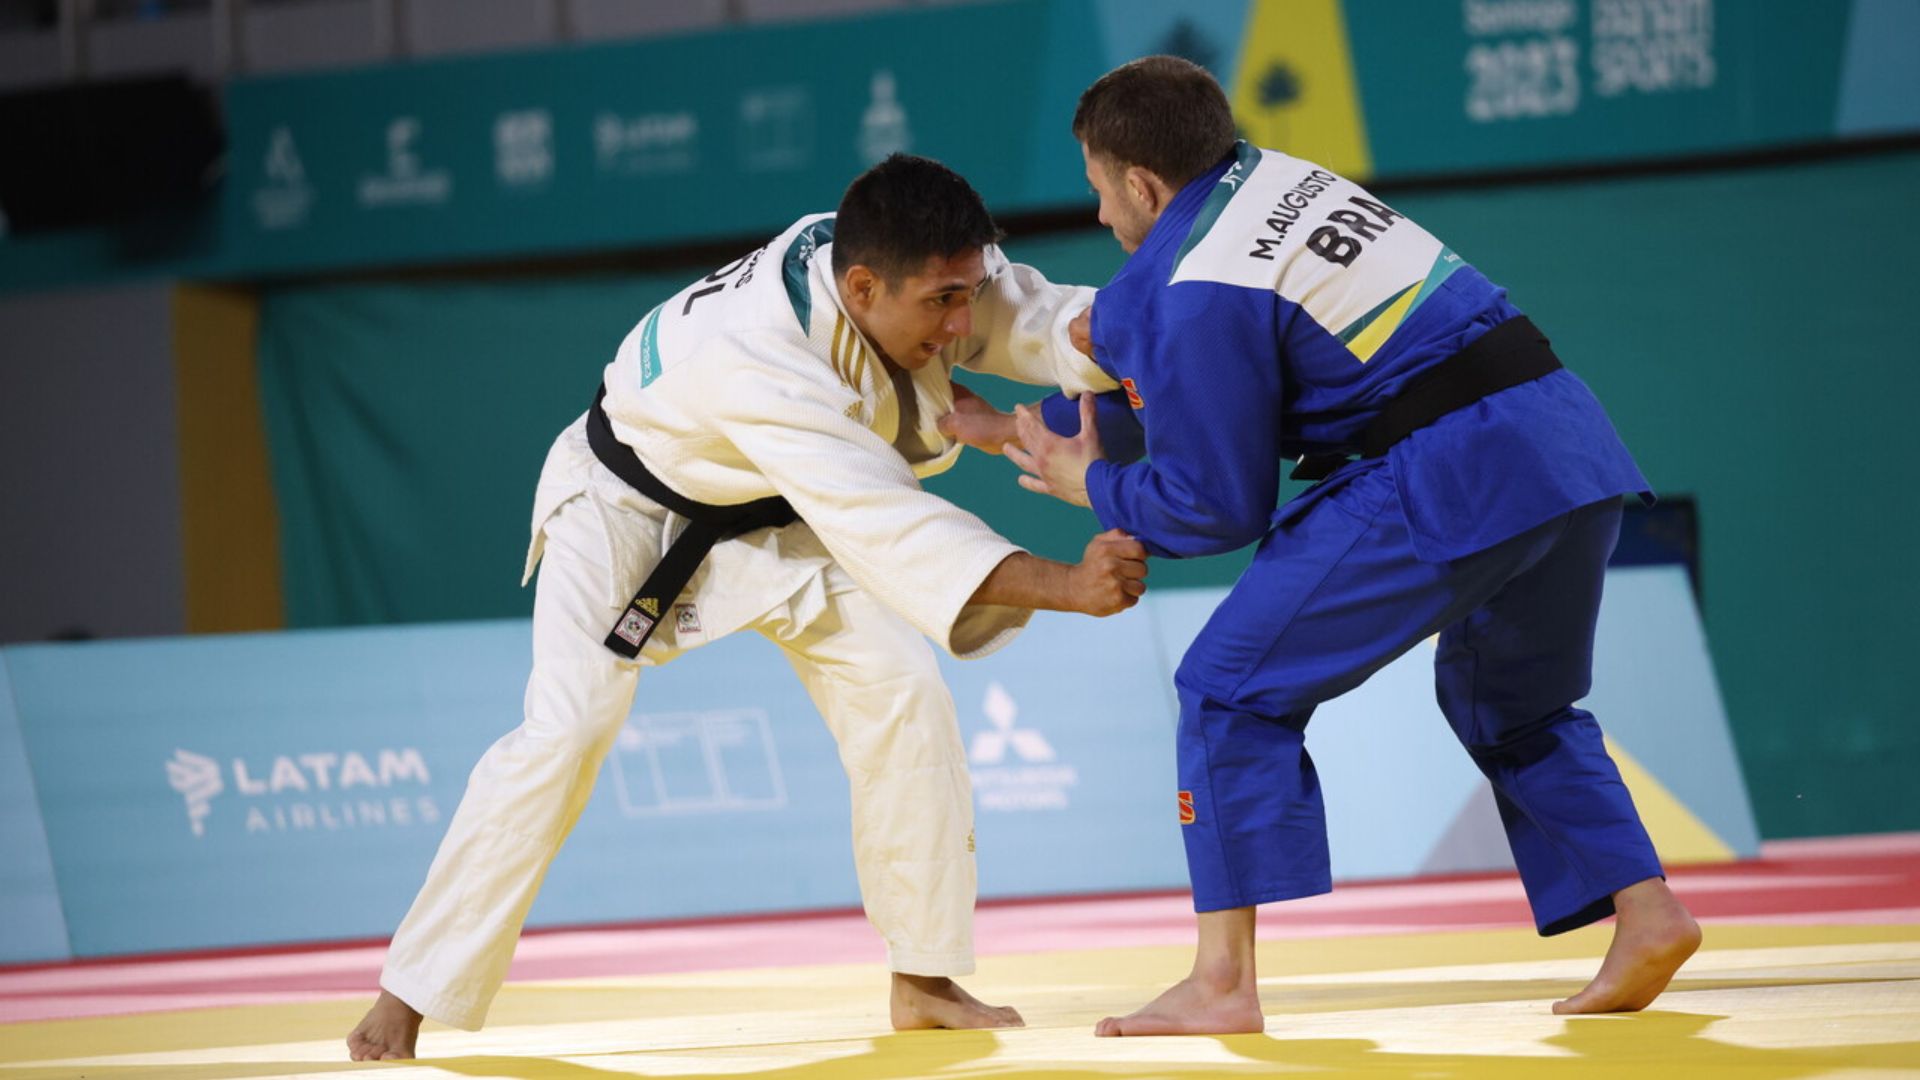 Brazil dominates on the first day of judo at Santiago 2023